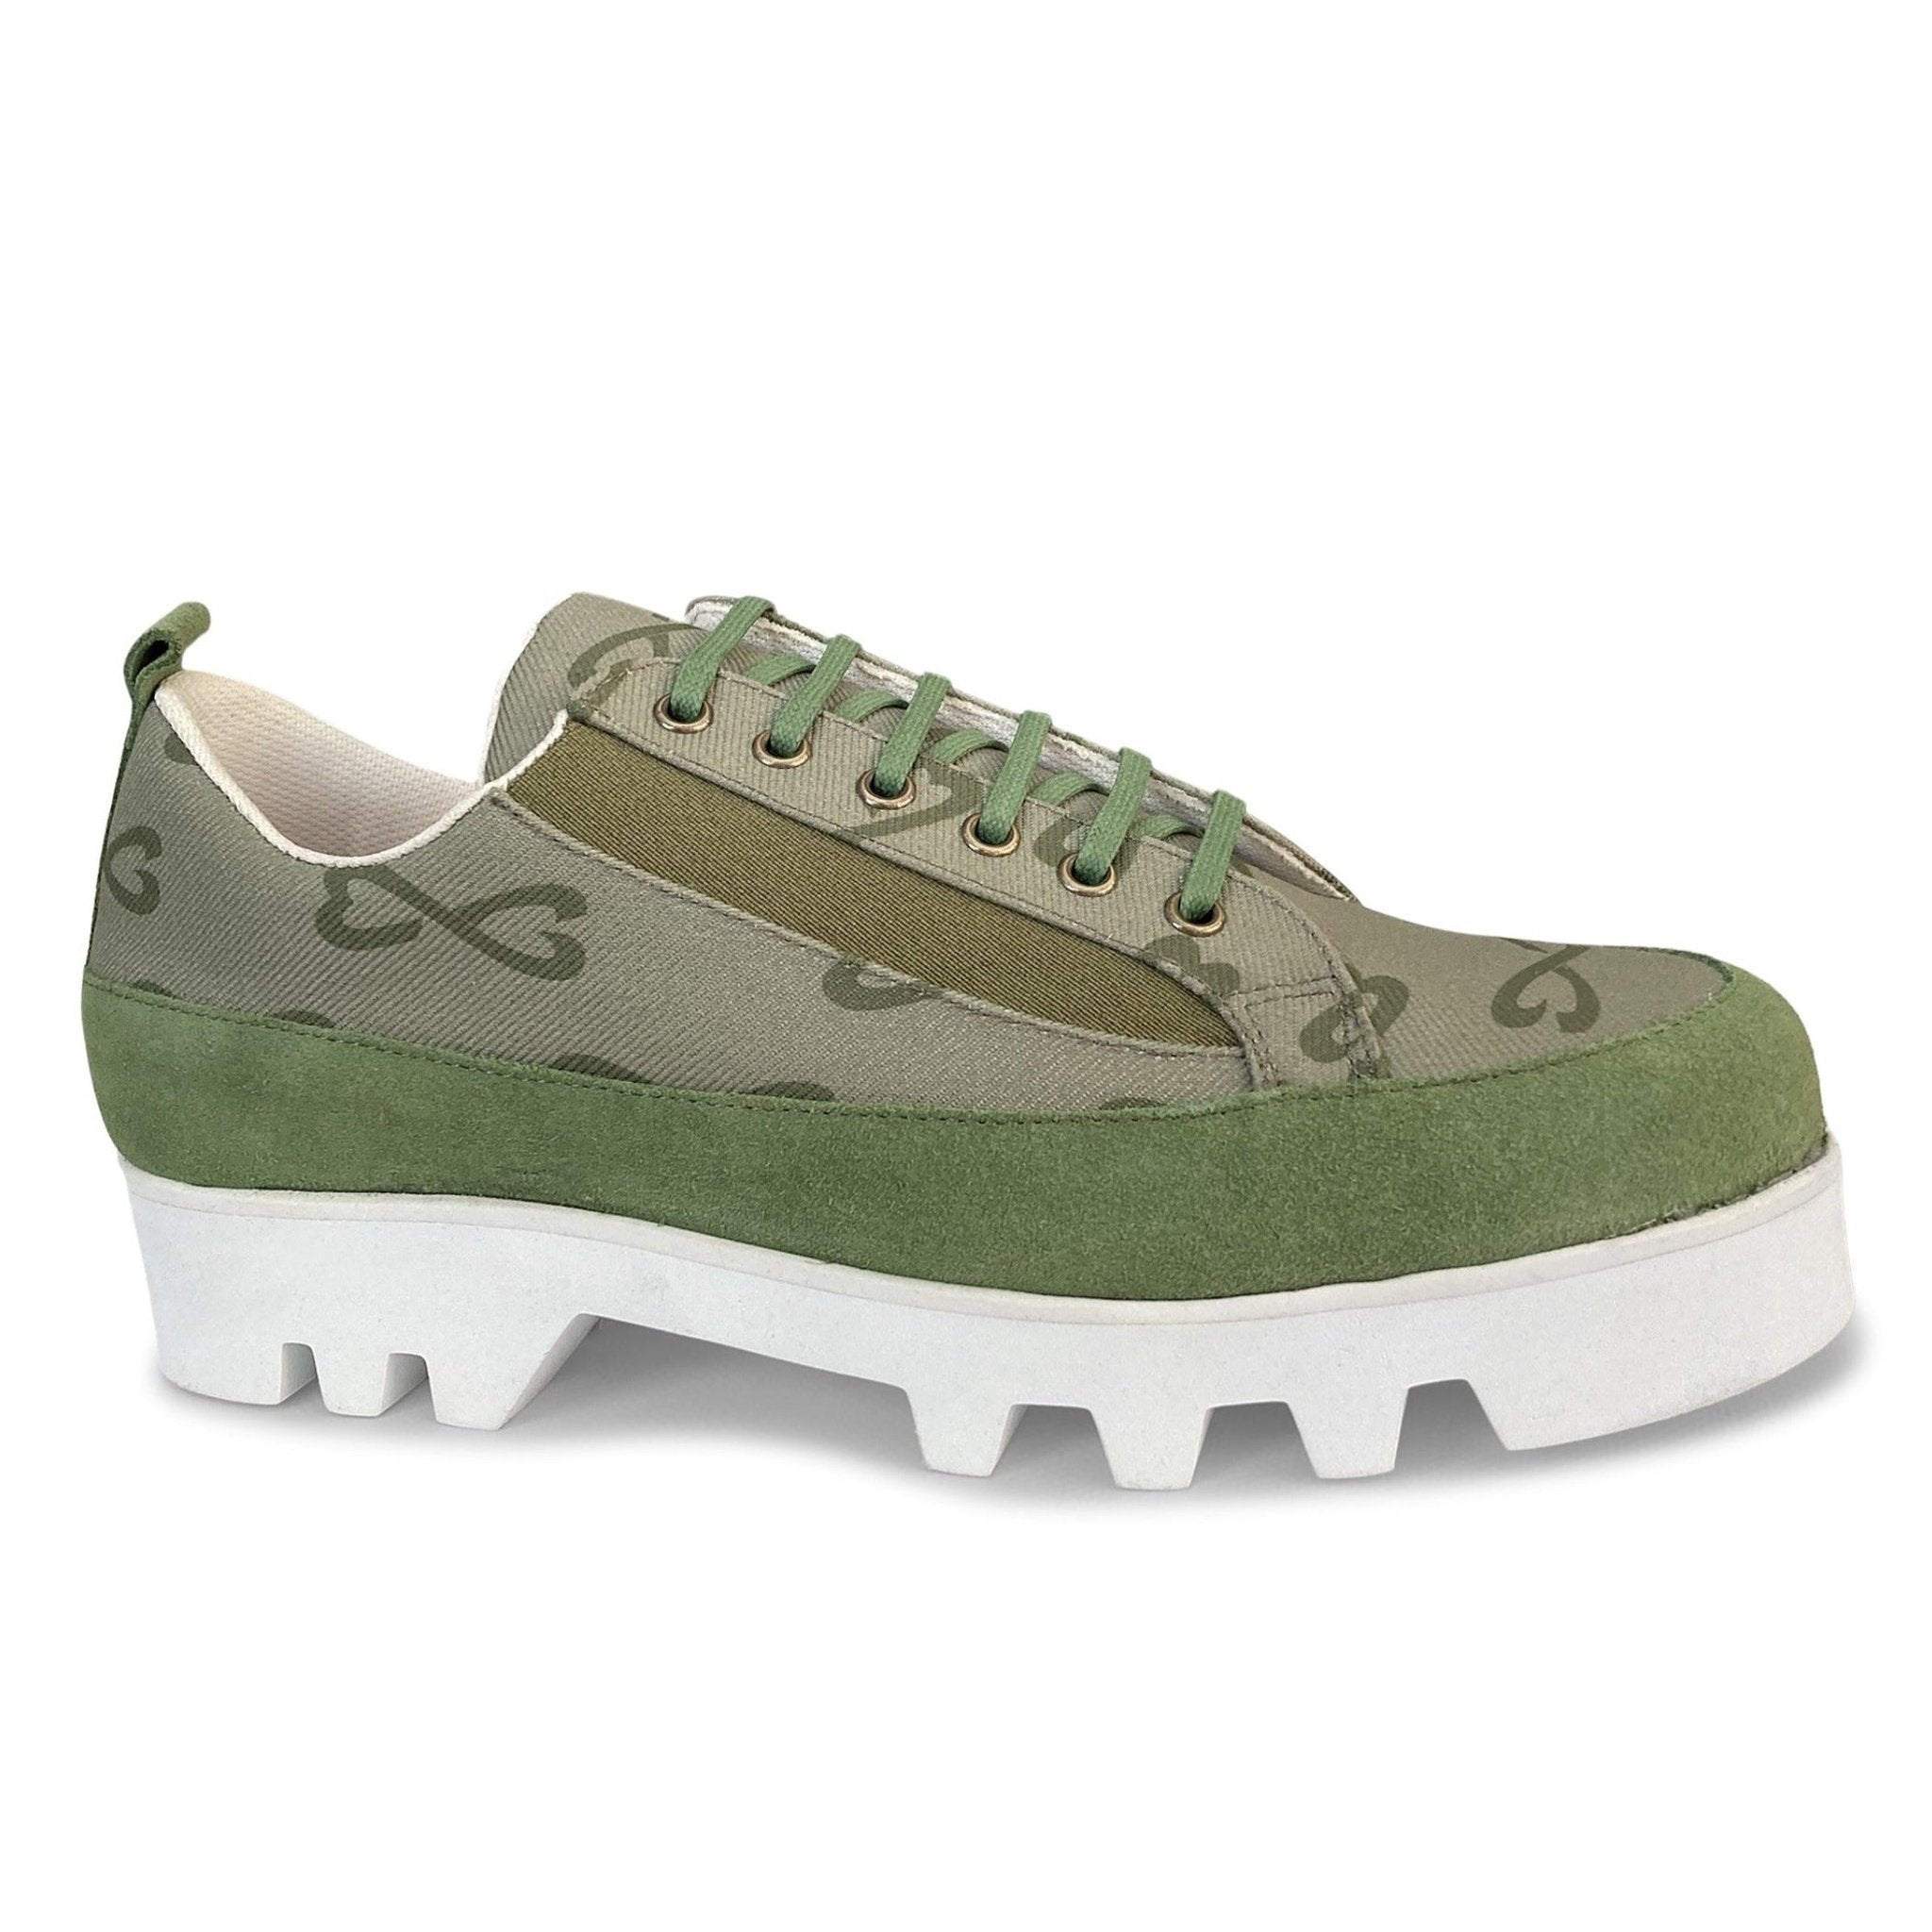 green canvas suede sneaker large sizes side